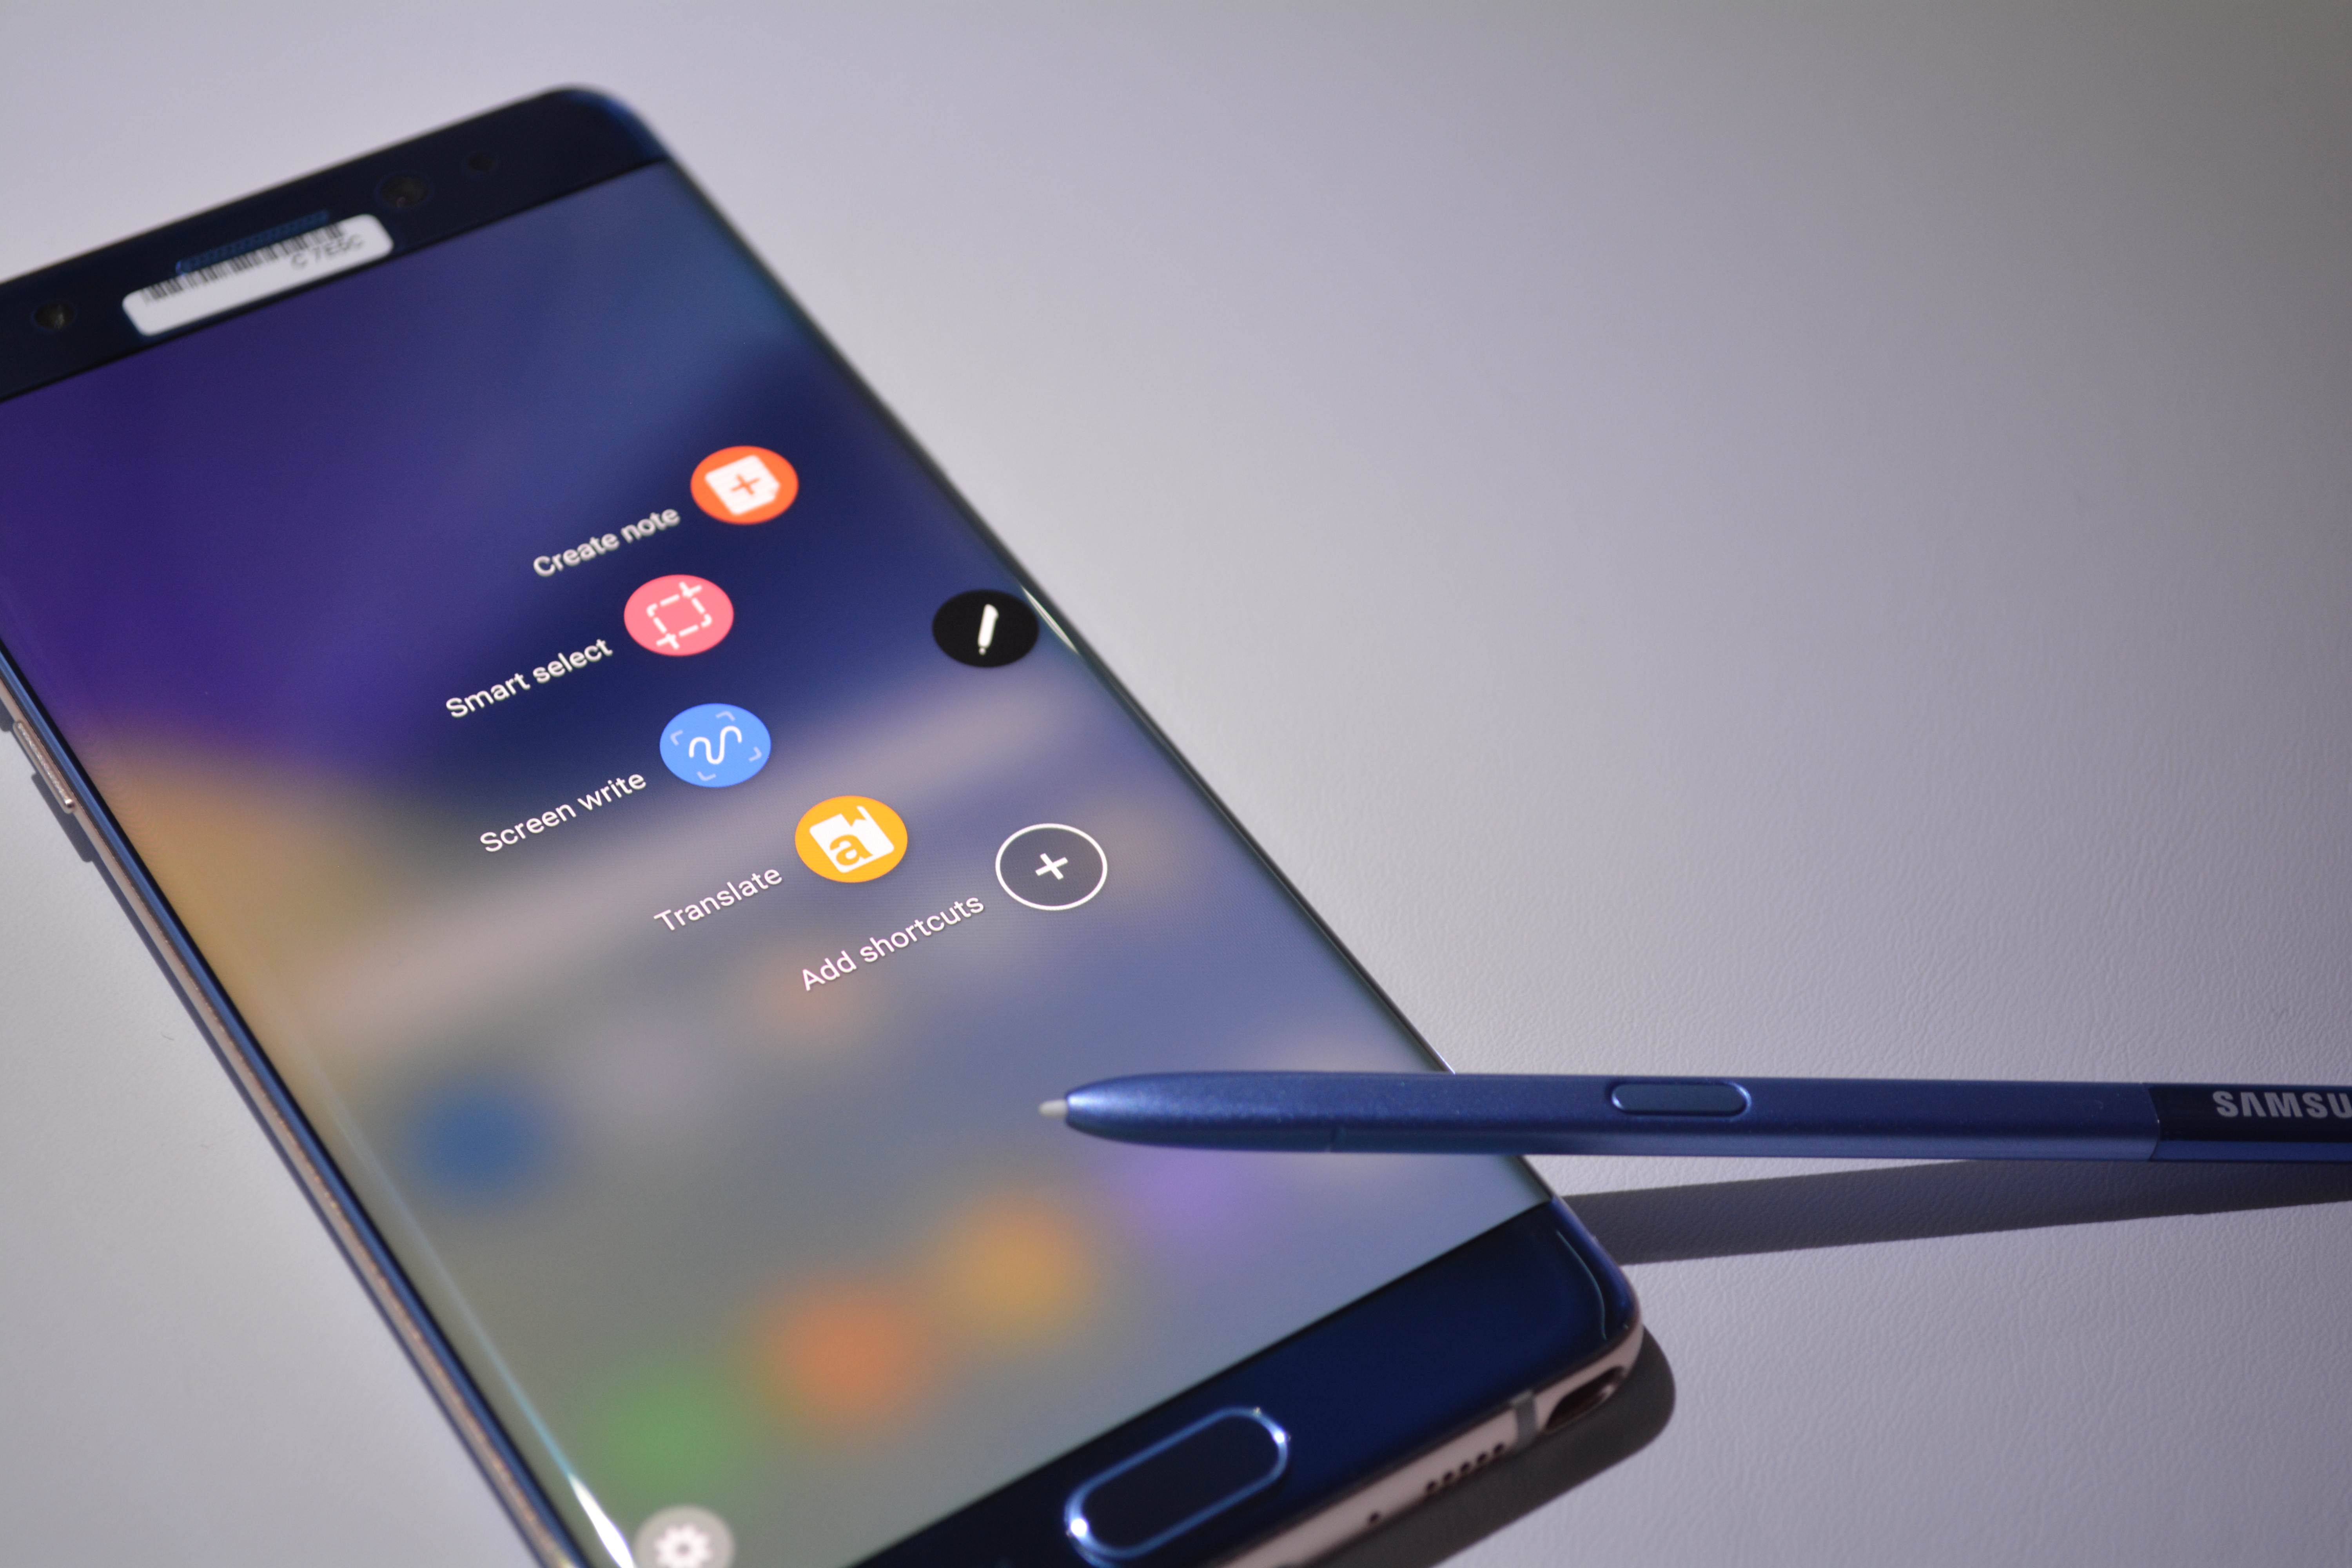 US Cellular follows Samsung’s advice and permanently halts sales of the Galaxy Note 7